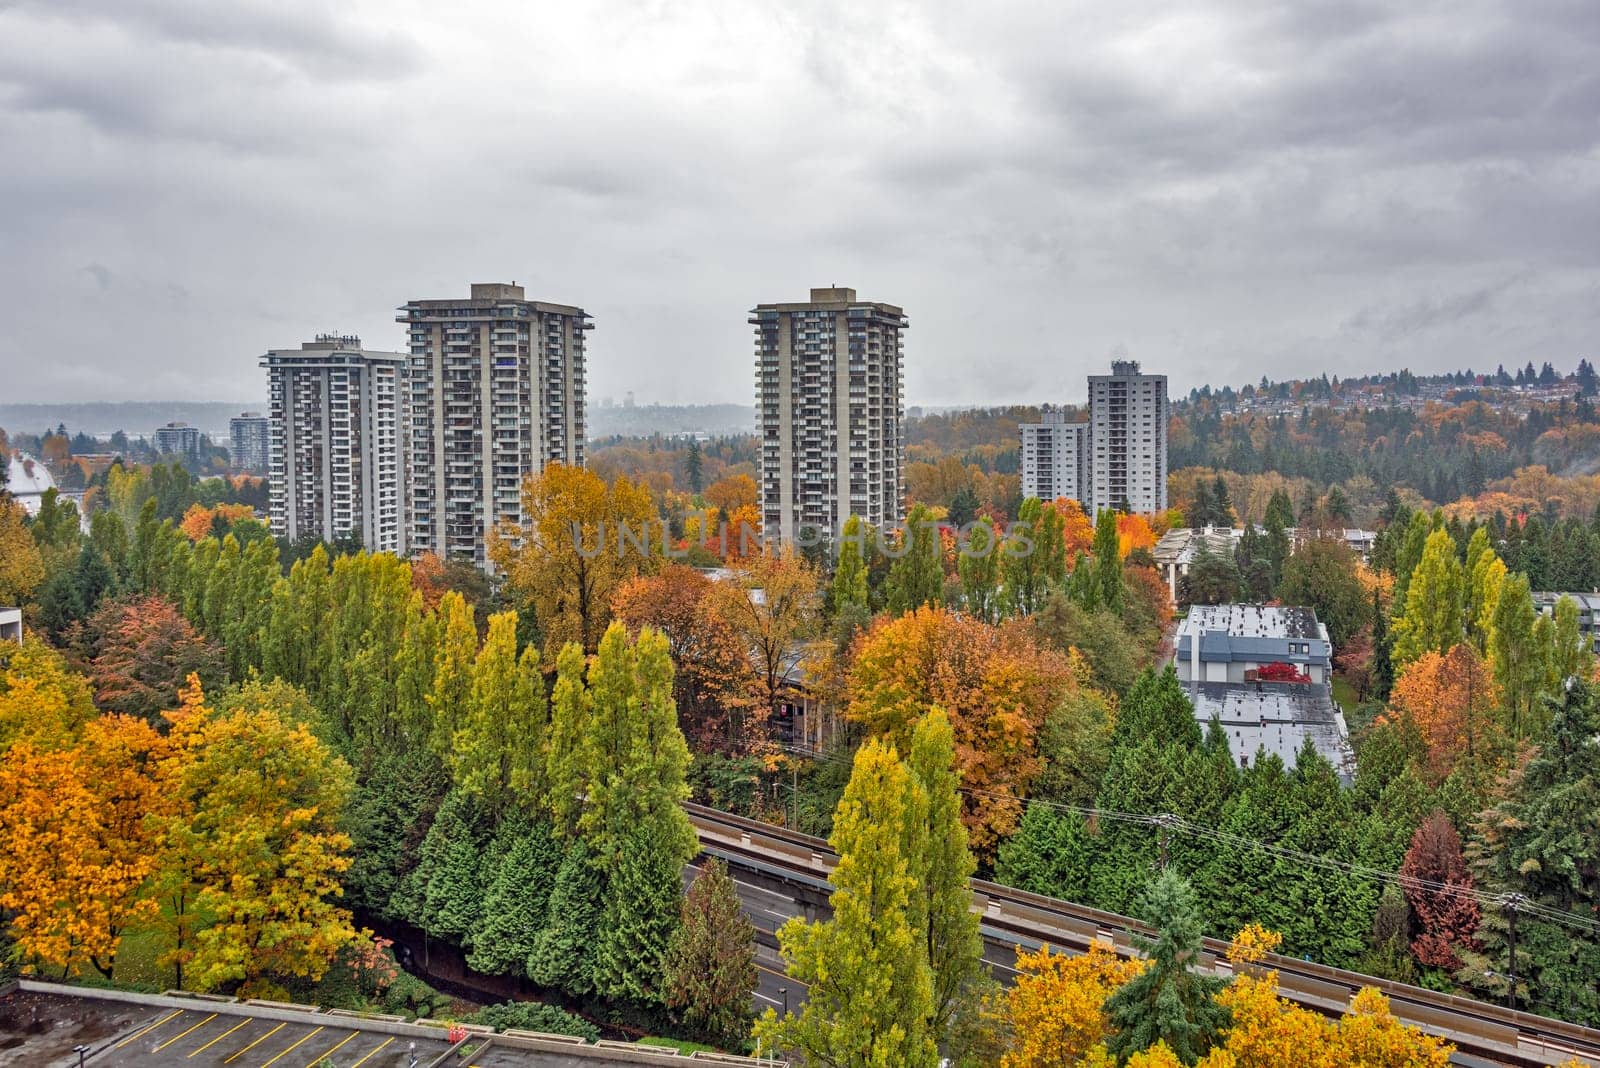 Colorful trees in cityscape on autum season in Burnaby, BC, Canada. Fall in a city